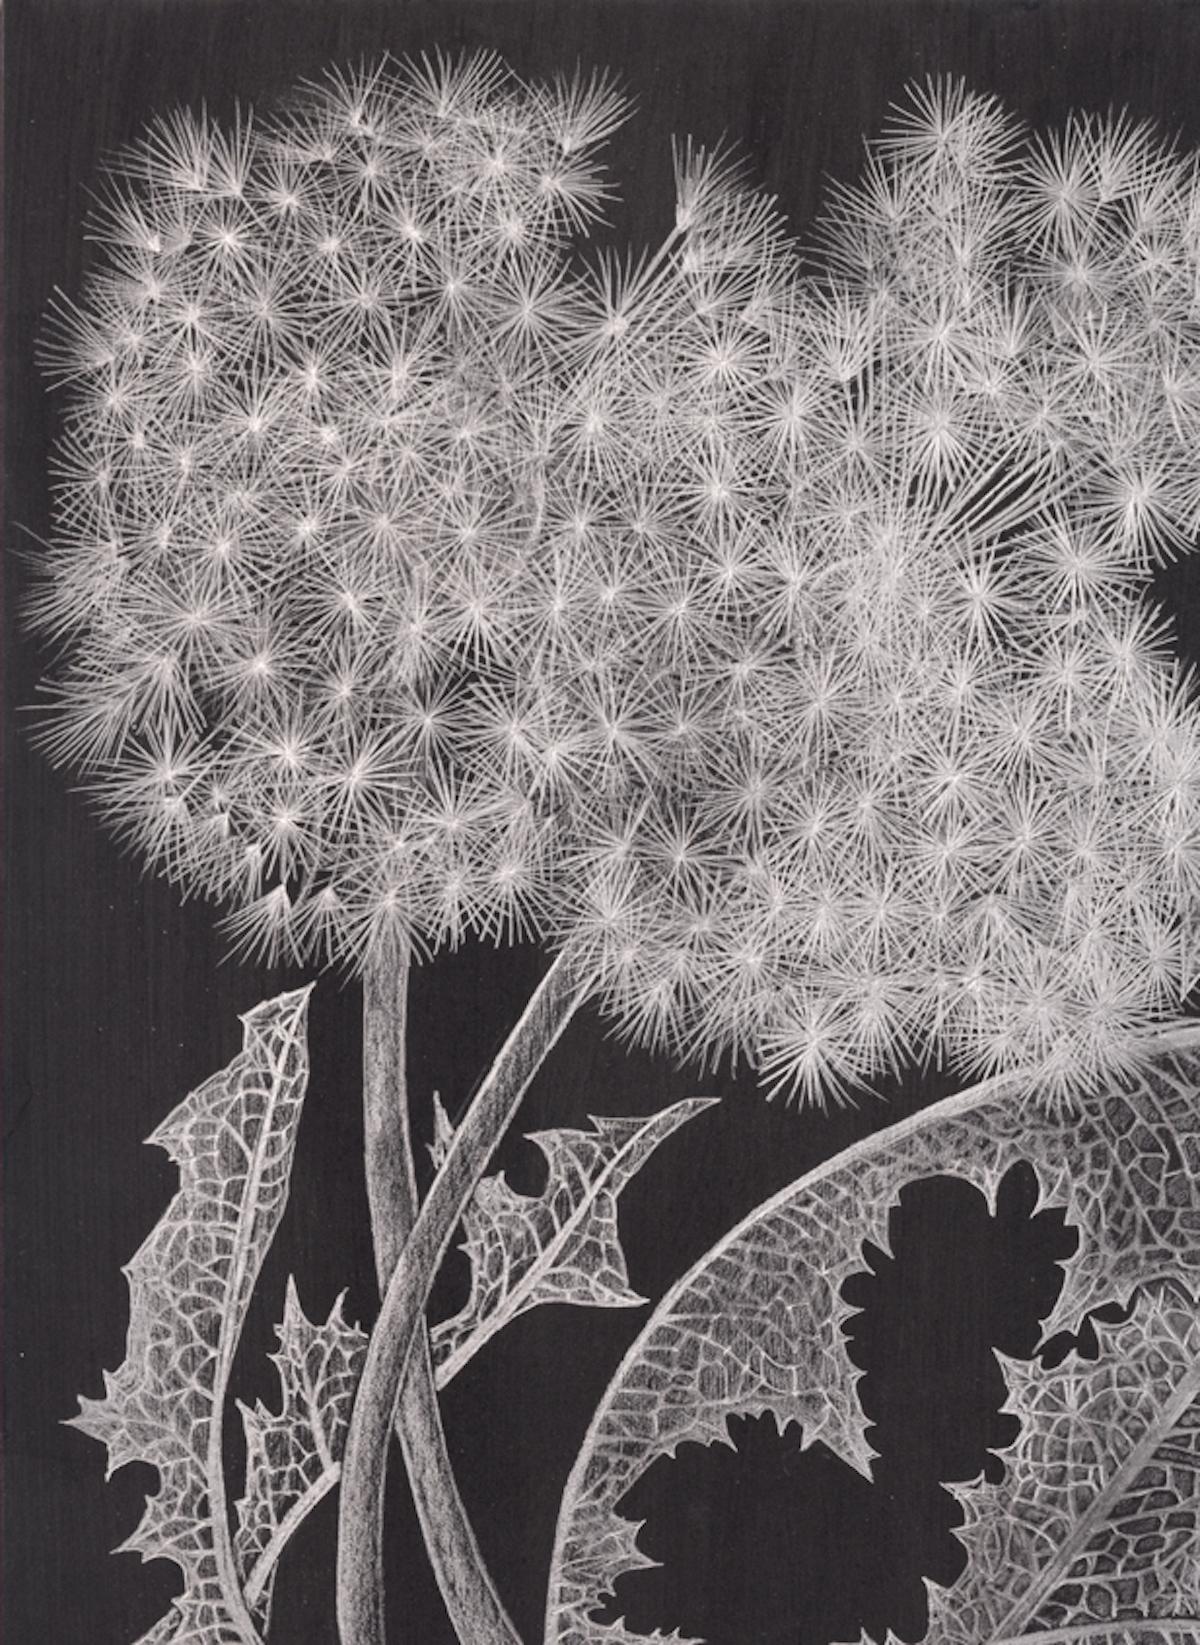 This delicate silver botanical drawing is made with graphite on painted black paper. The exploration of ephemerality, and the fragility of dandelions, their texture and movement, are the focus of this series by Margot Glass. The exquisite beauty of